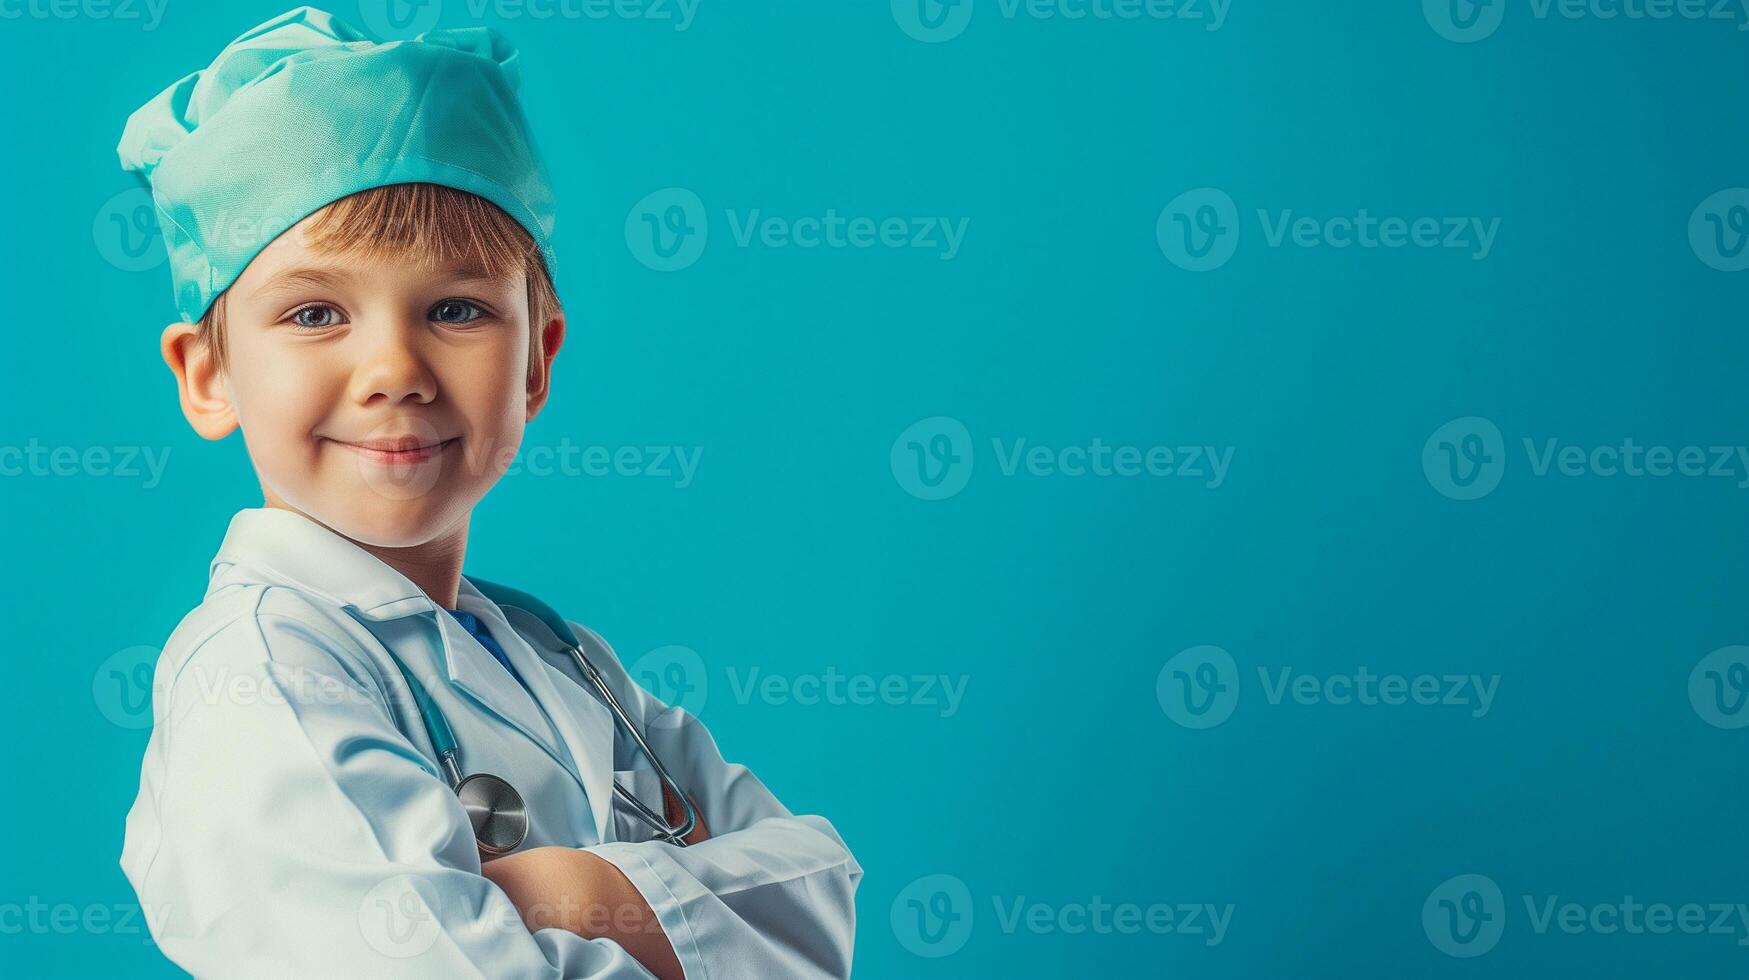 AI generated A cheerful young boy poses confidently in a doctor's scrubs and cap, complete with a stethoscope, against a vibrant blue background photo